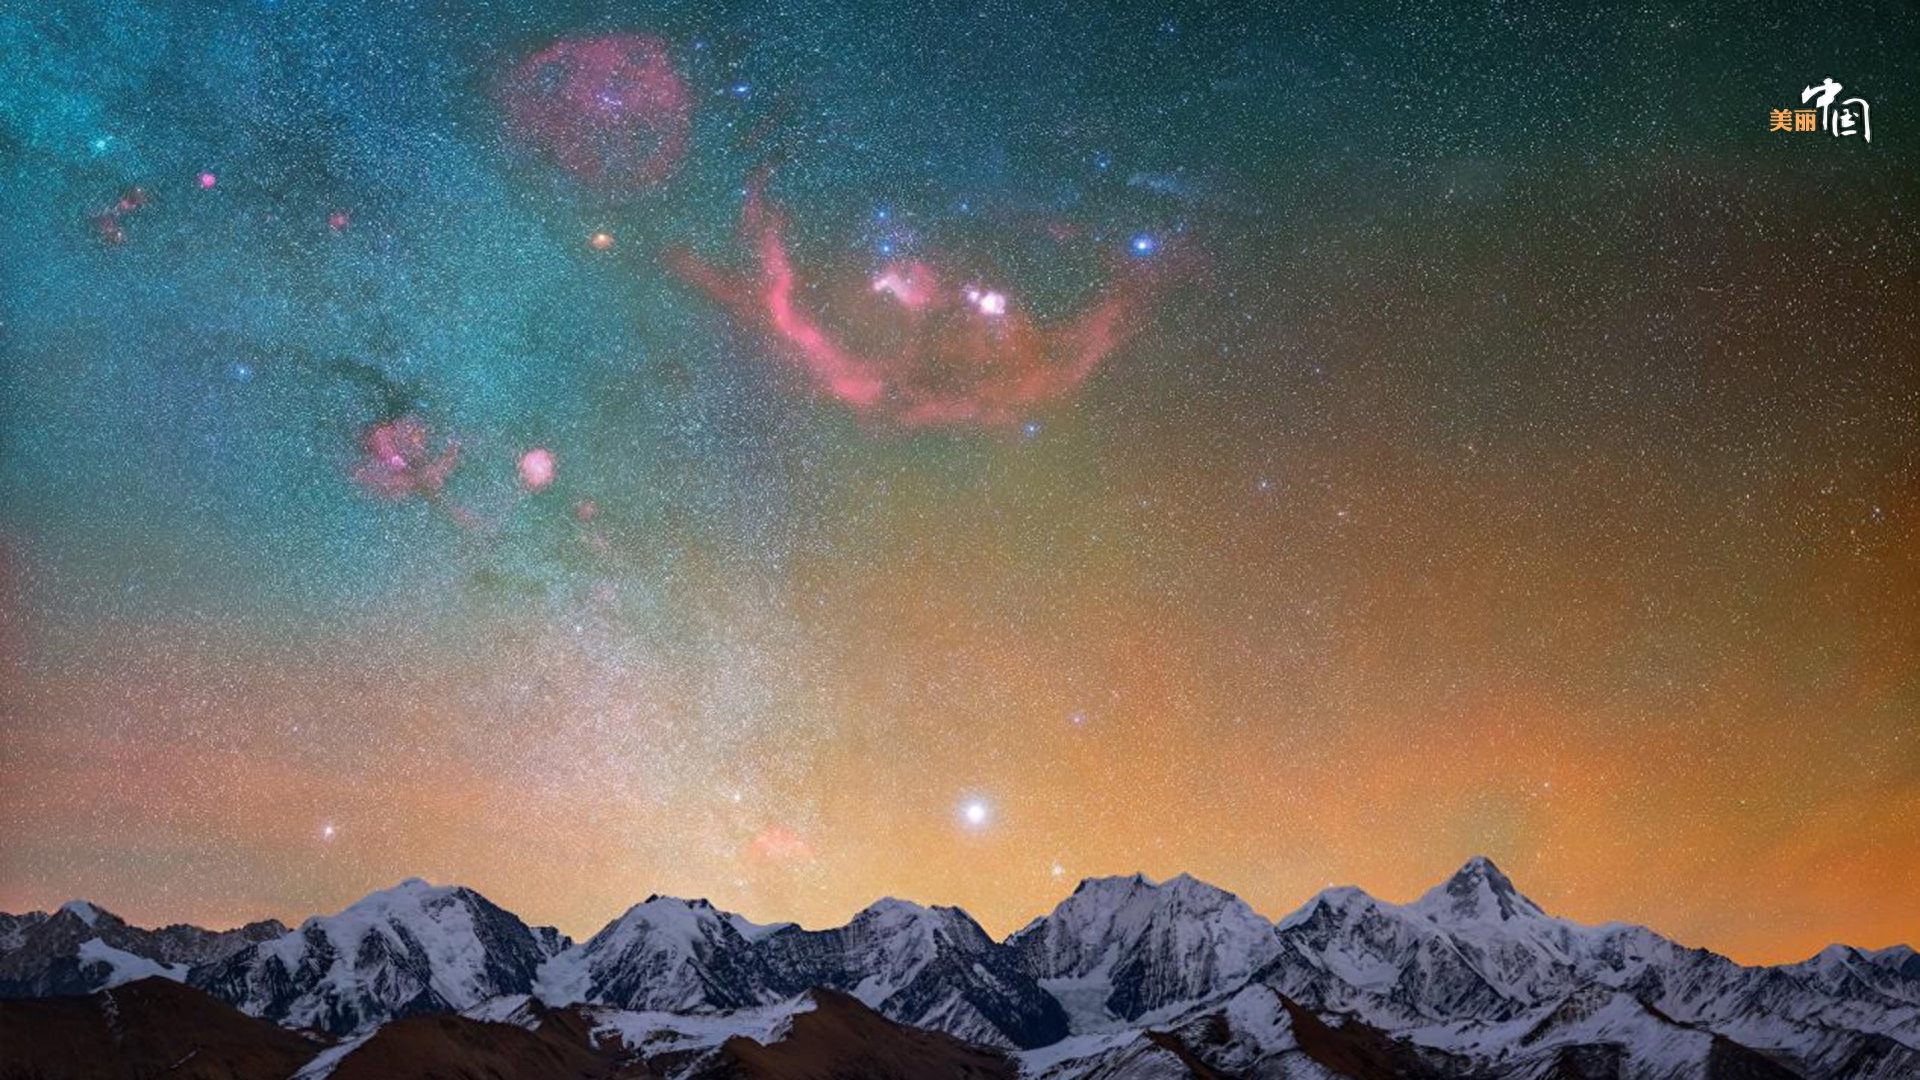 Please check! The most beautiful starry sky photos in China in 2019 are here